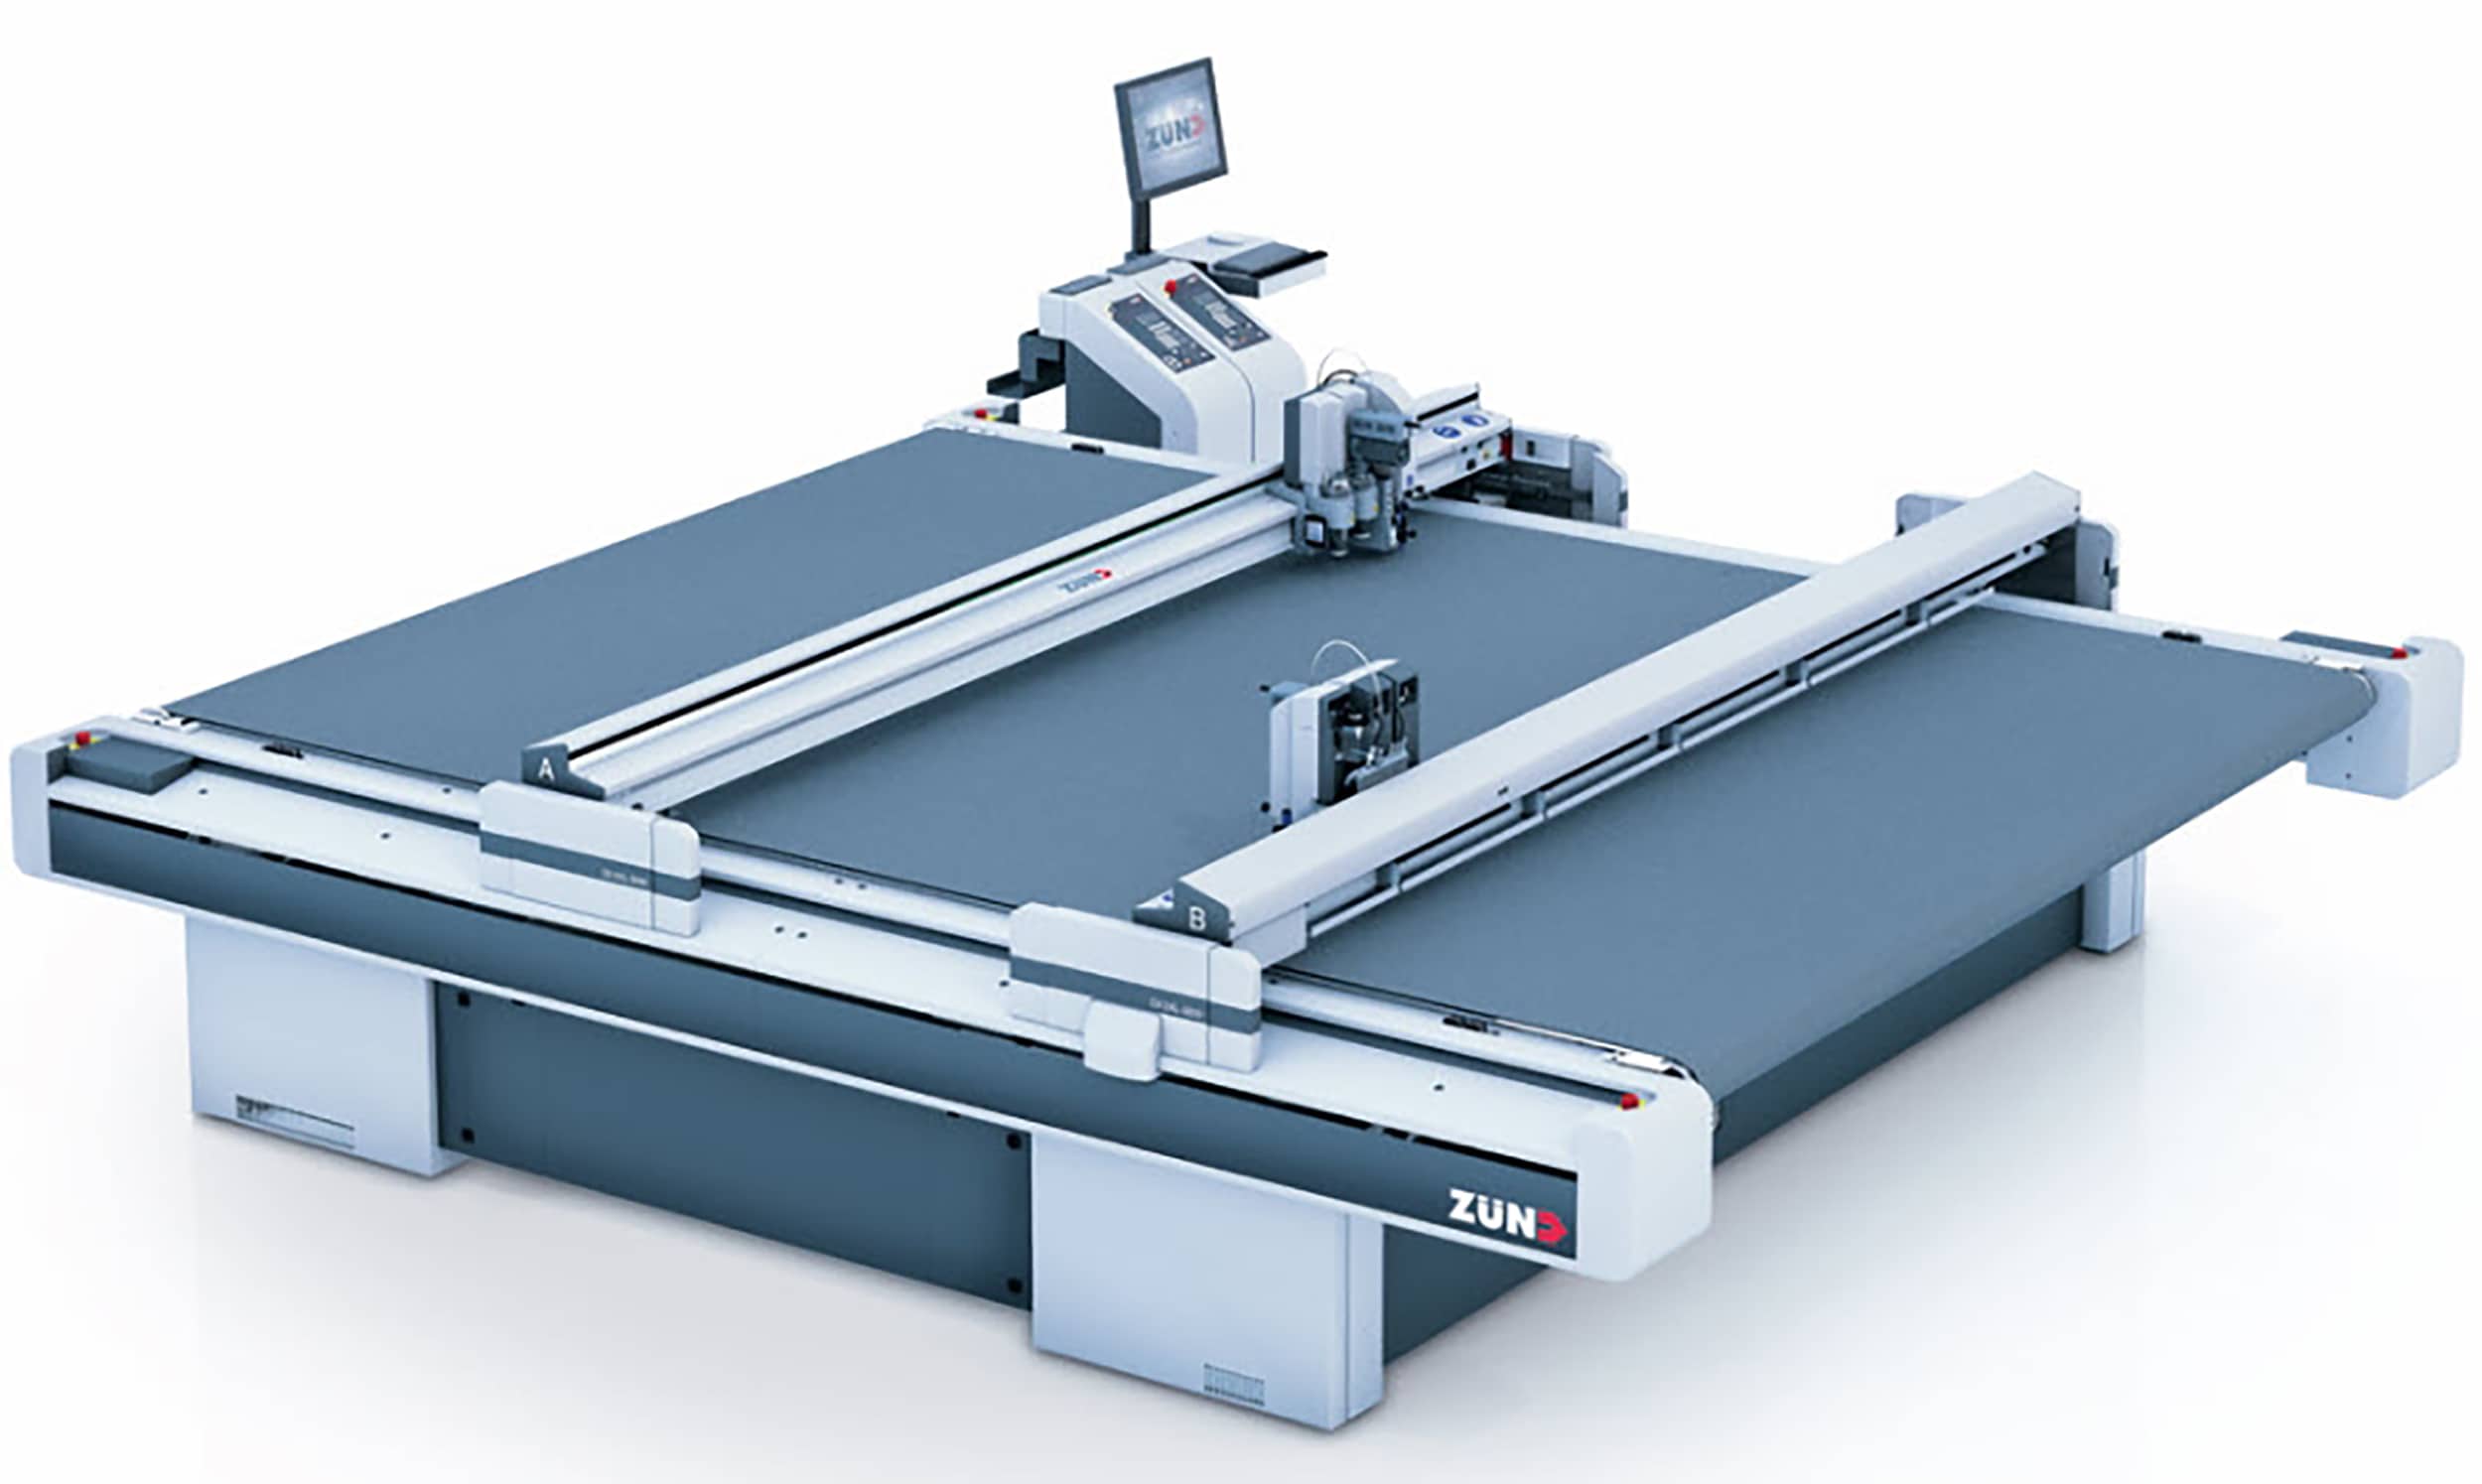 Michael Greenwald from NextPage says his Zünd cutter “just runs and runs and runs!"